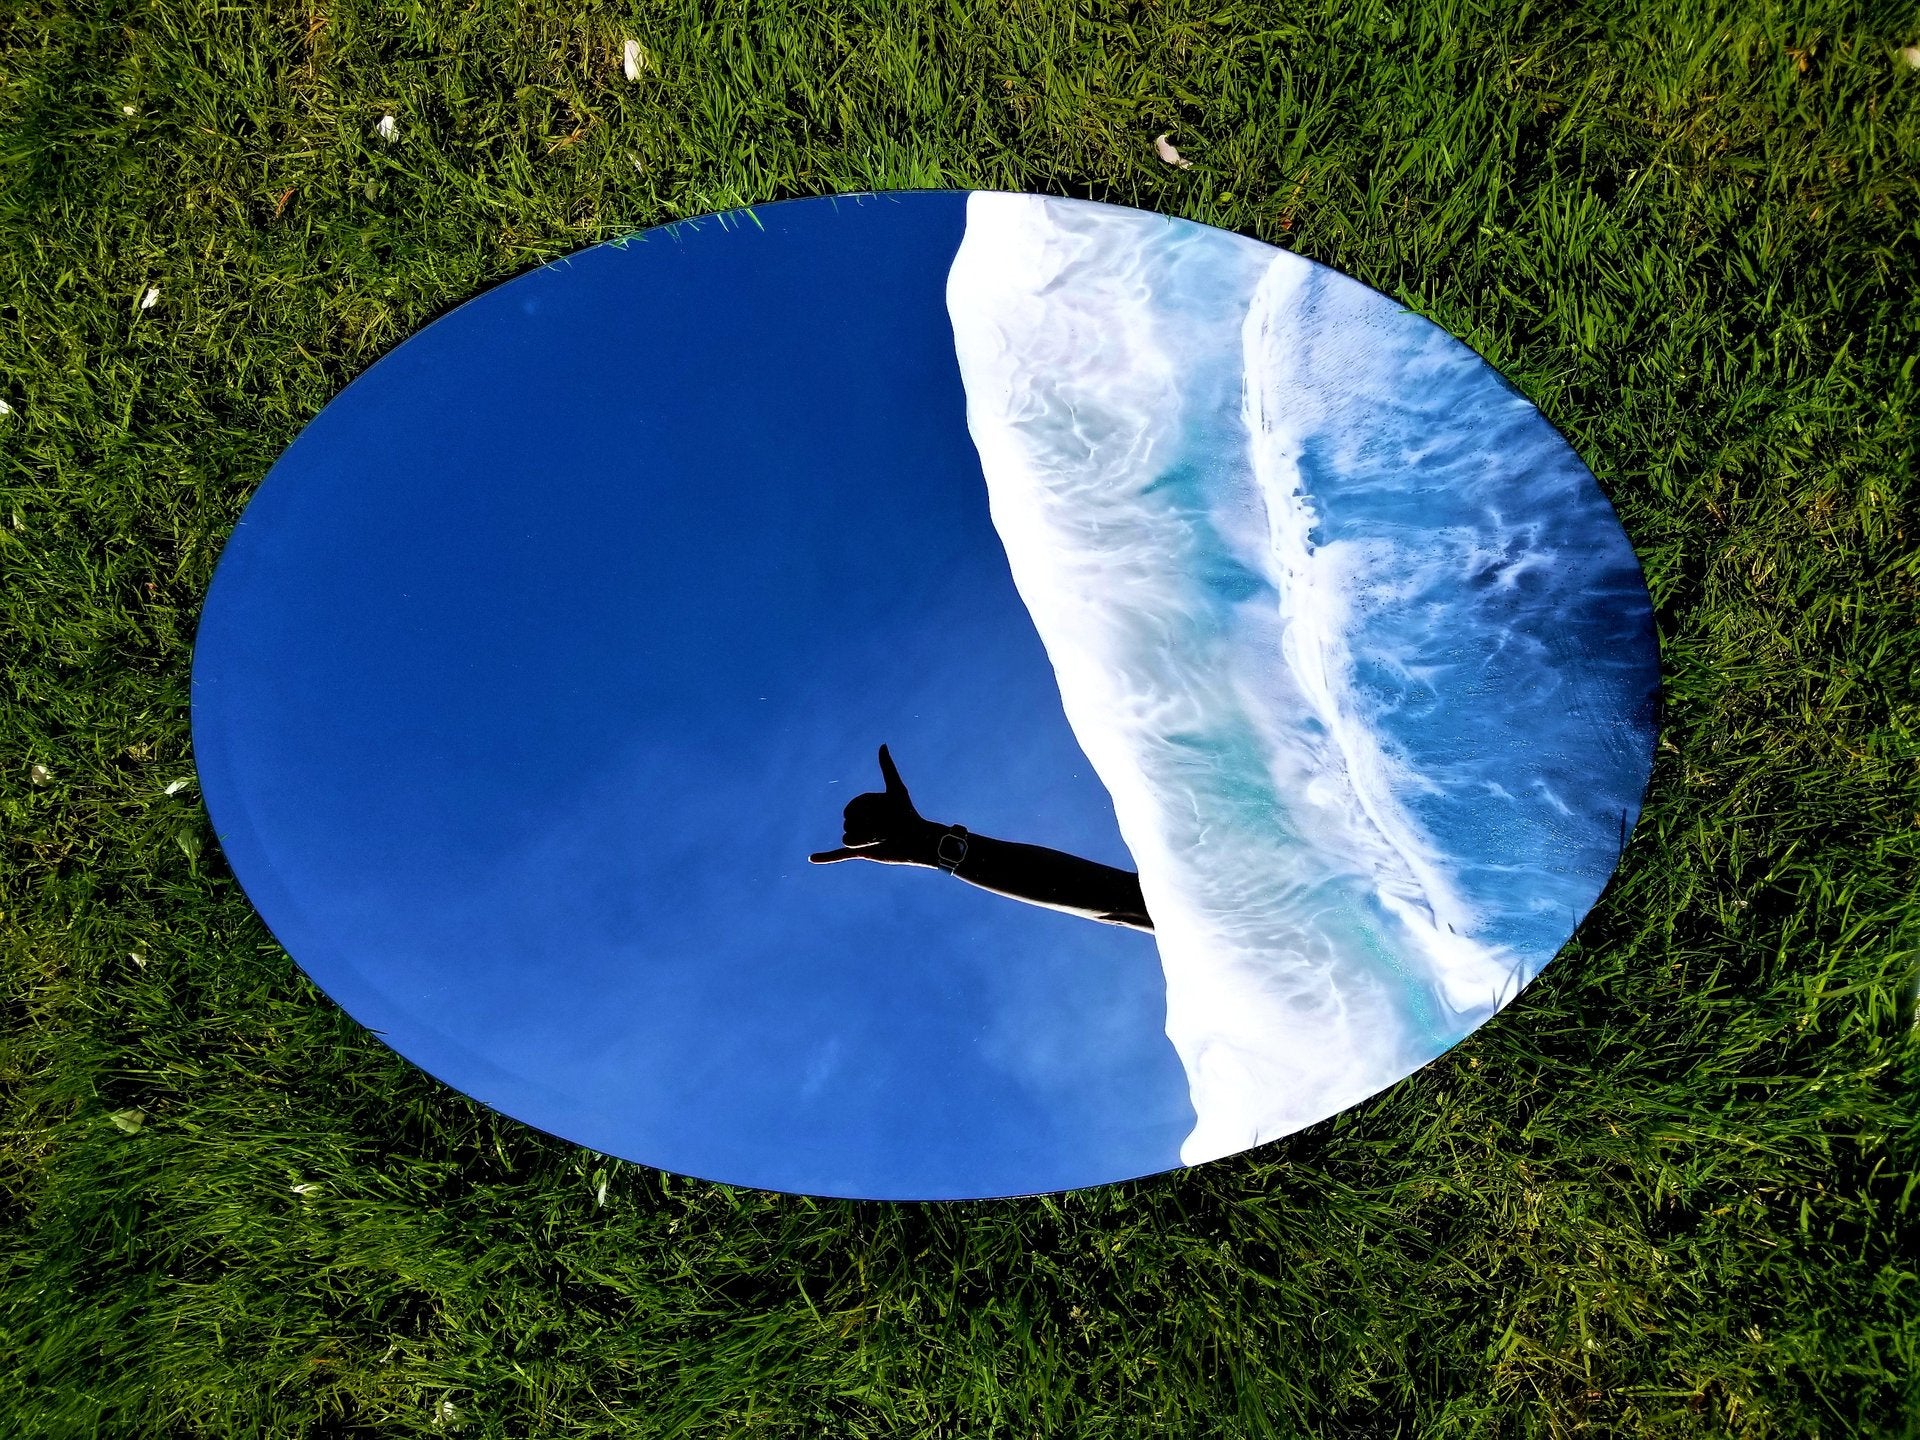 Cast a Glance Collection. Mirrors with resin ocean waves